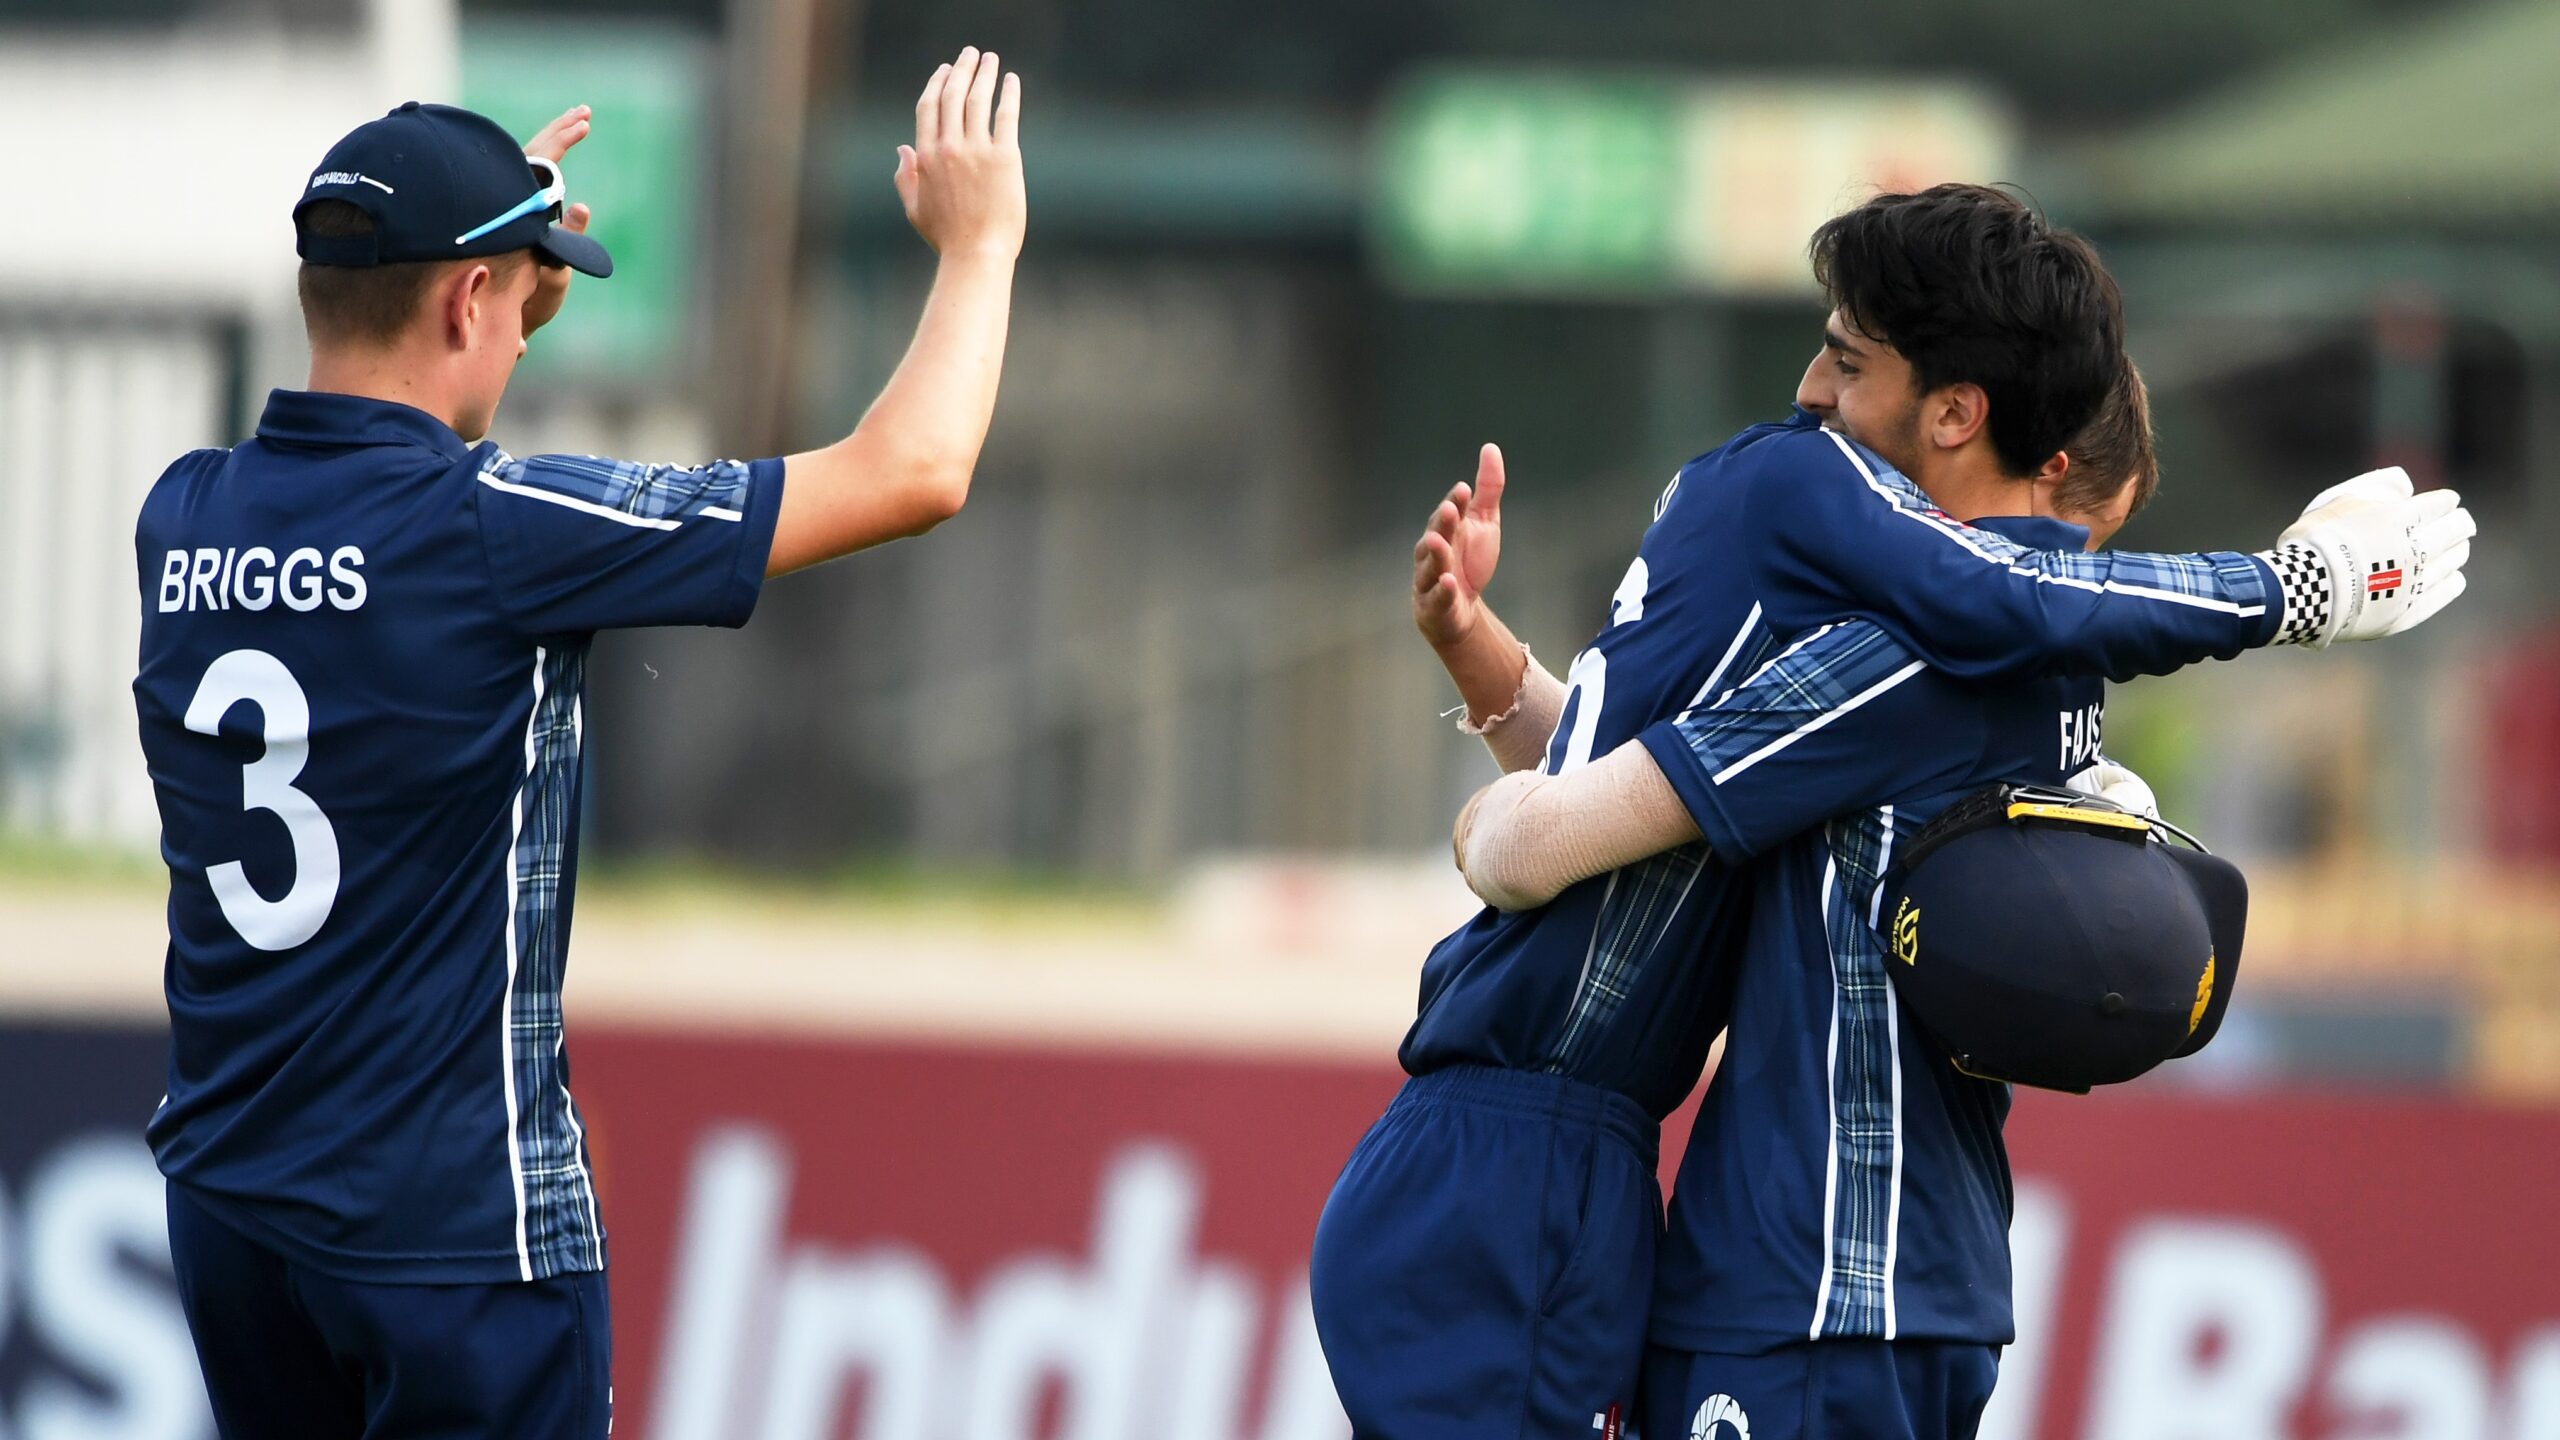 SCOTLAND UNDER 19s DEFEAT NAMIBIA IN THRILLER TO END TOURNAMENT ON A HIGH